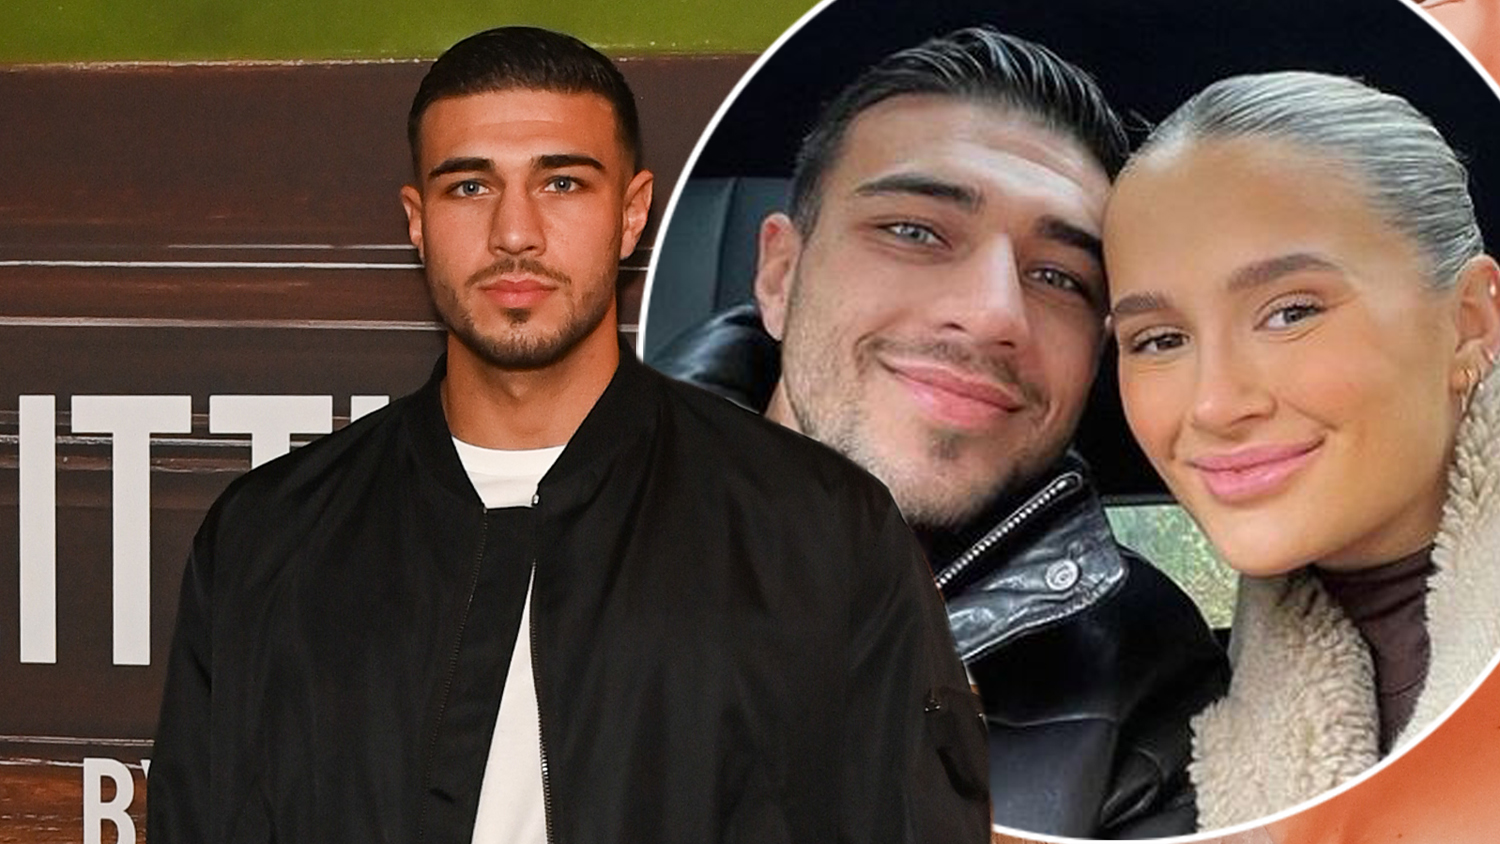 Molly-Mae Hague's fans thinks hiding her 'engagement' to Tommy Fury